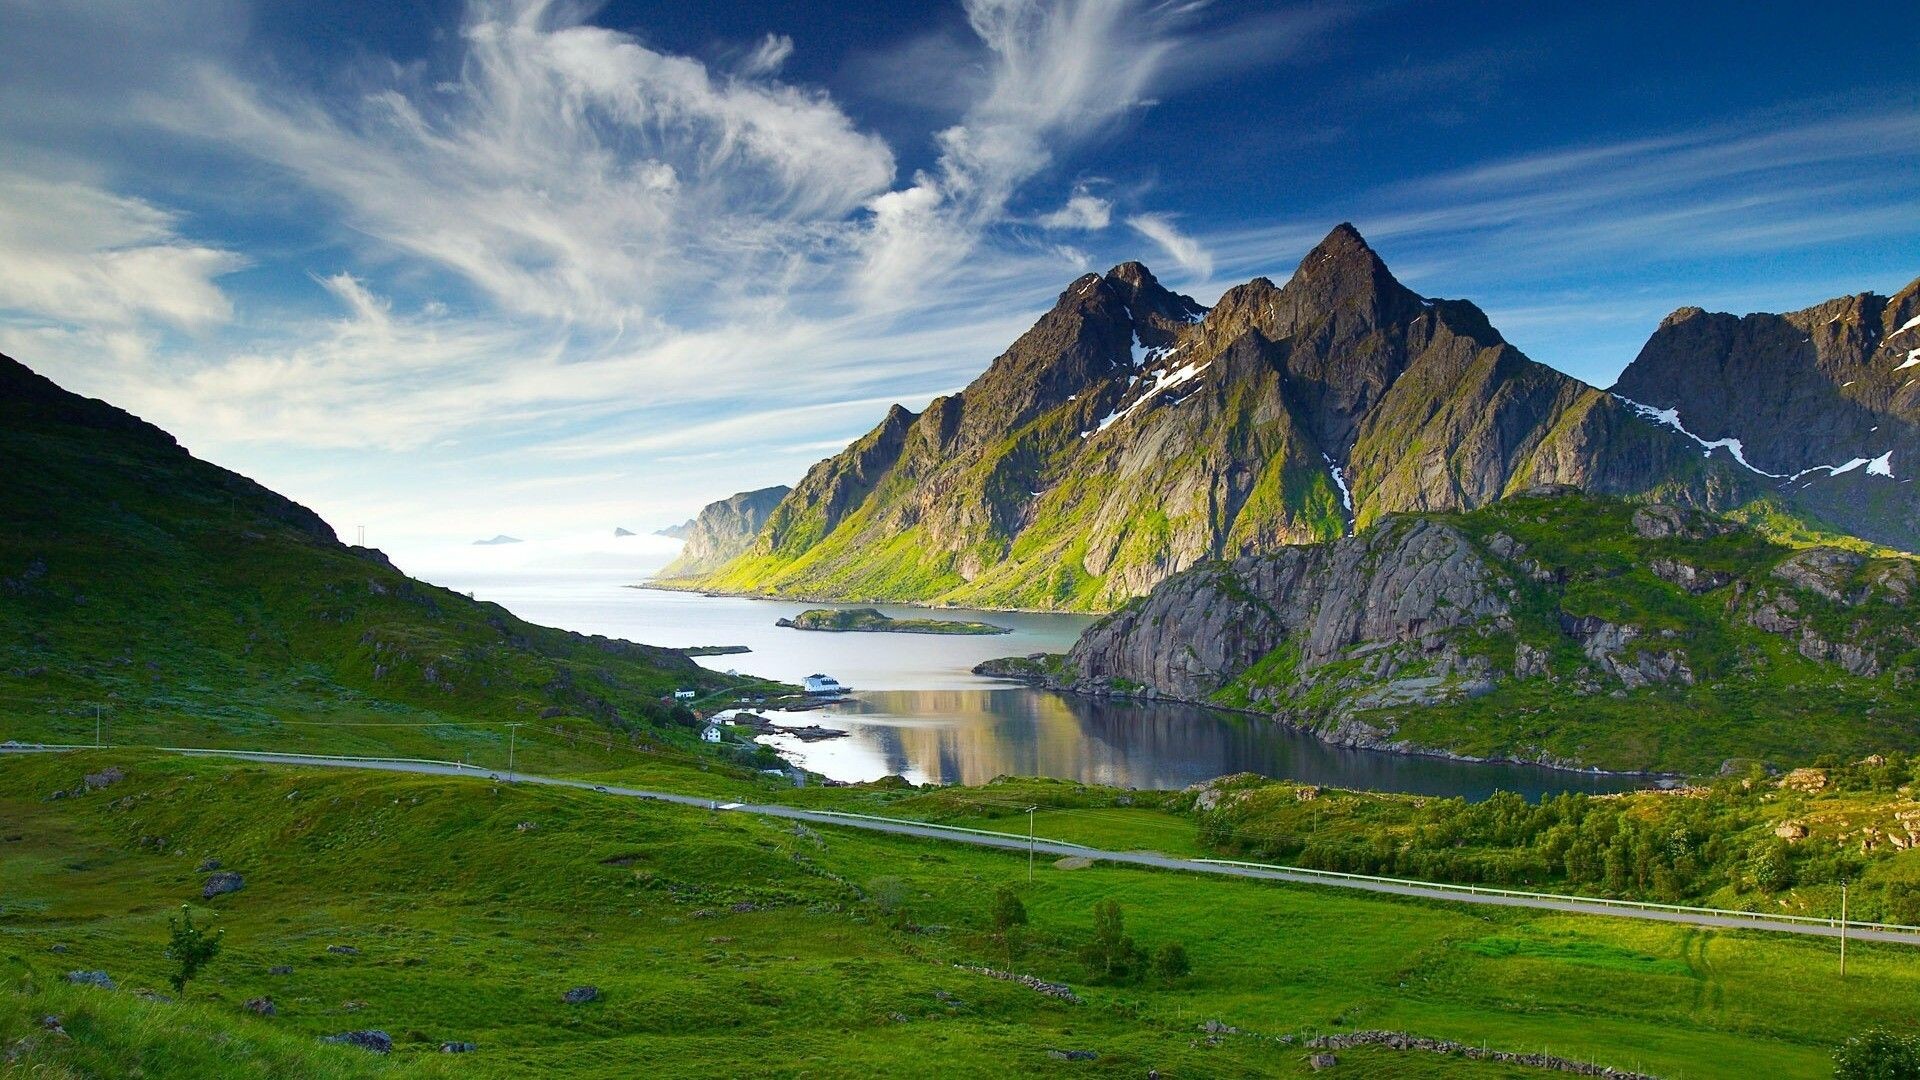 Norway: Mountainous landscape, The country occupies part of Northern Europe’s Fennoscandian Shield. 1920x1080 Full HD Wallpaper.